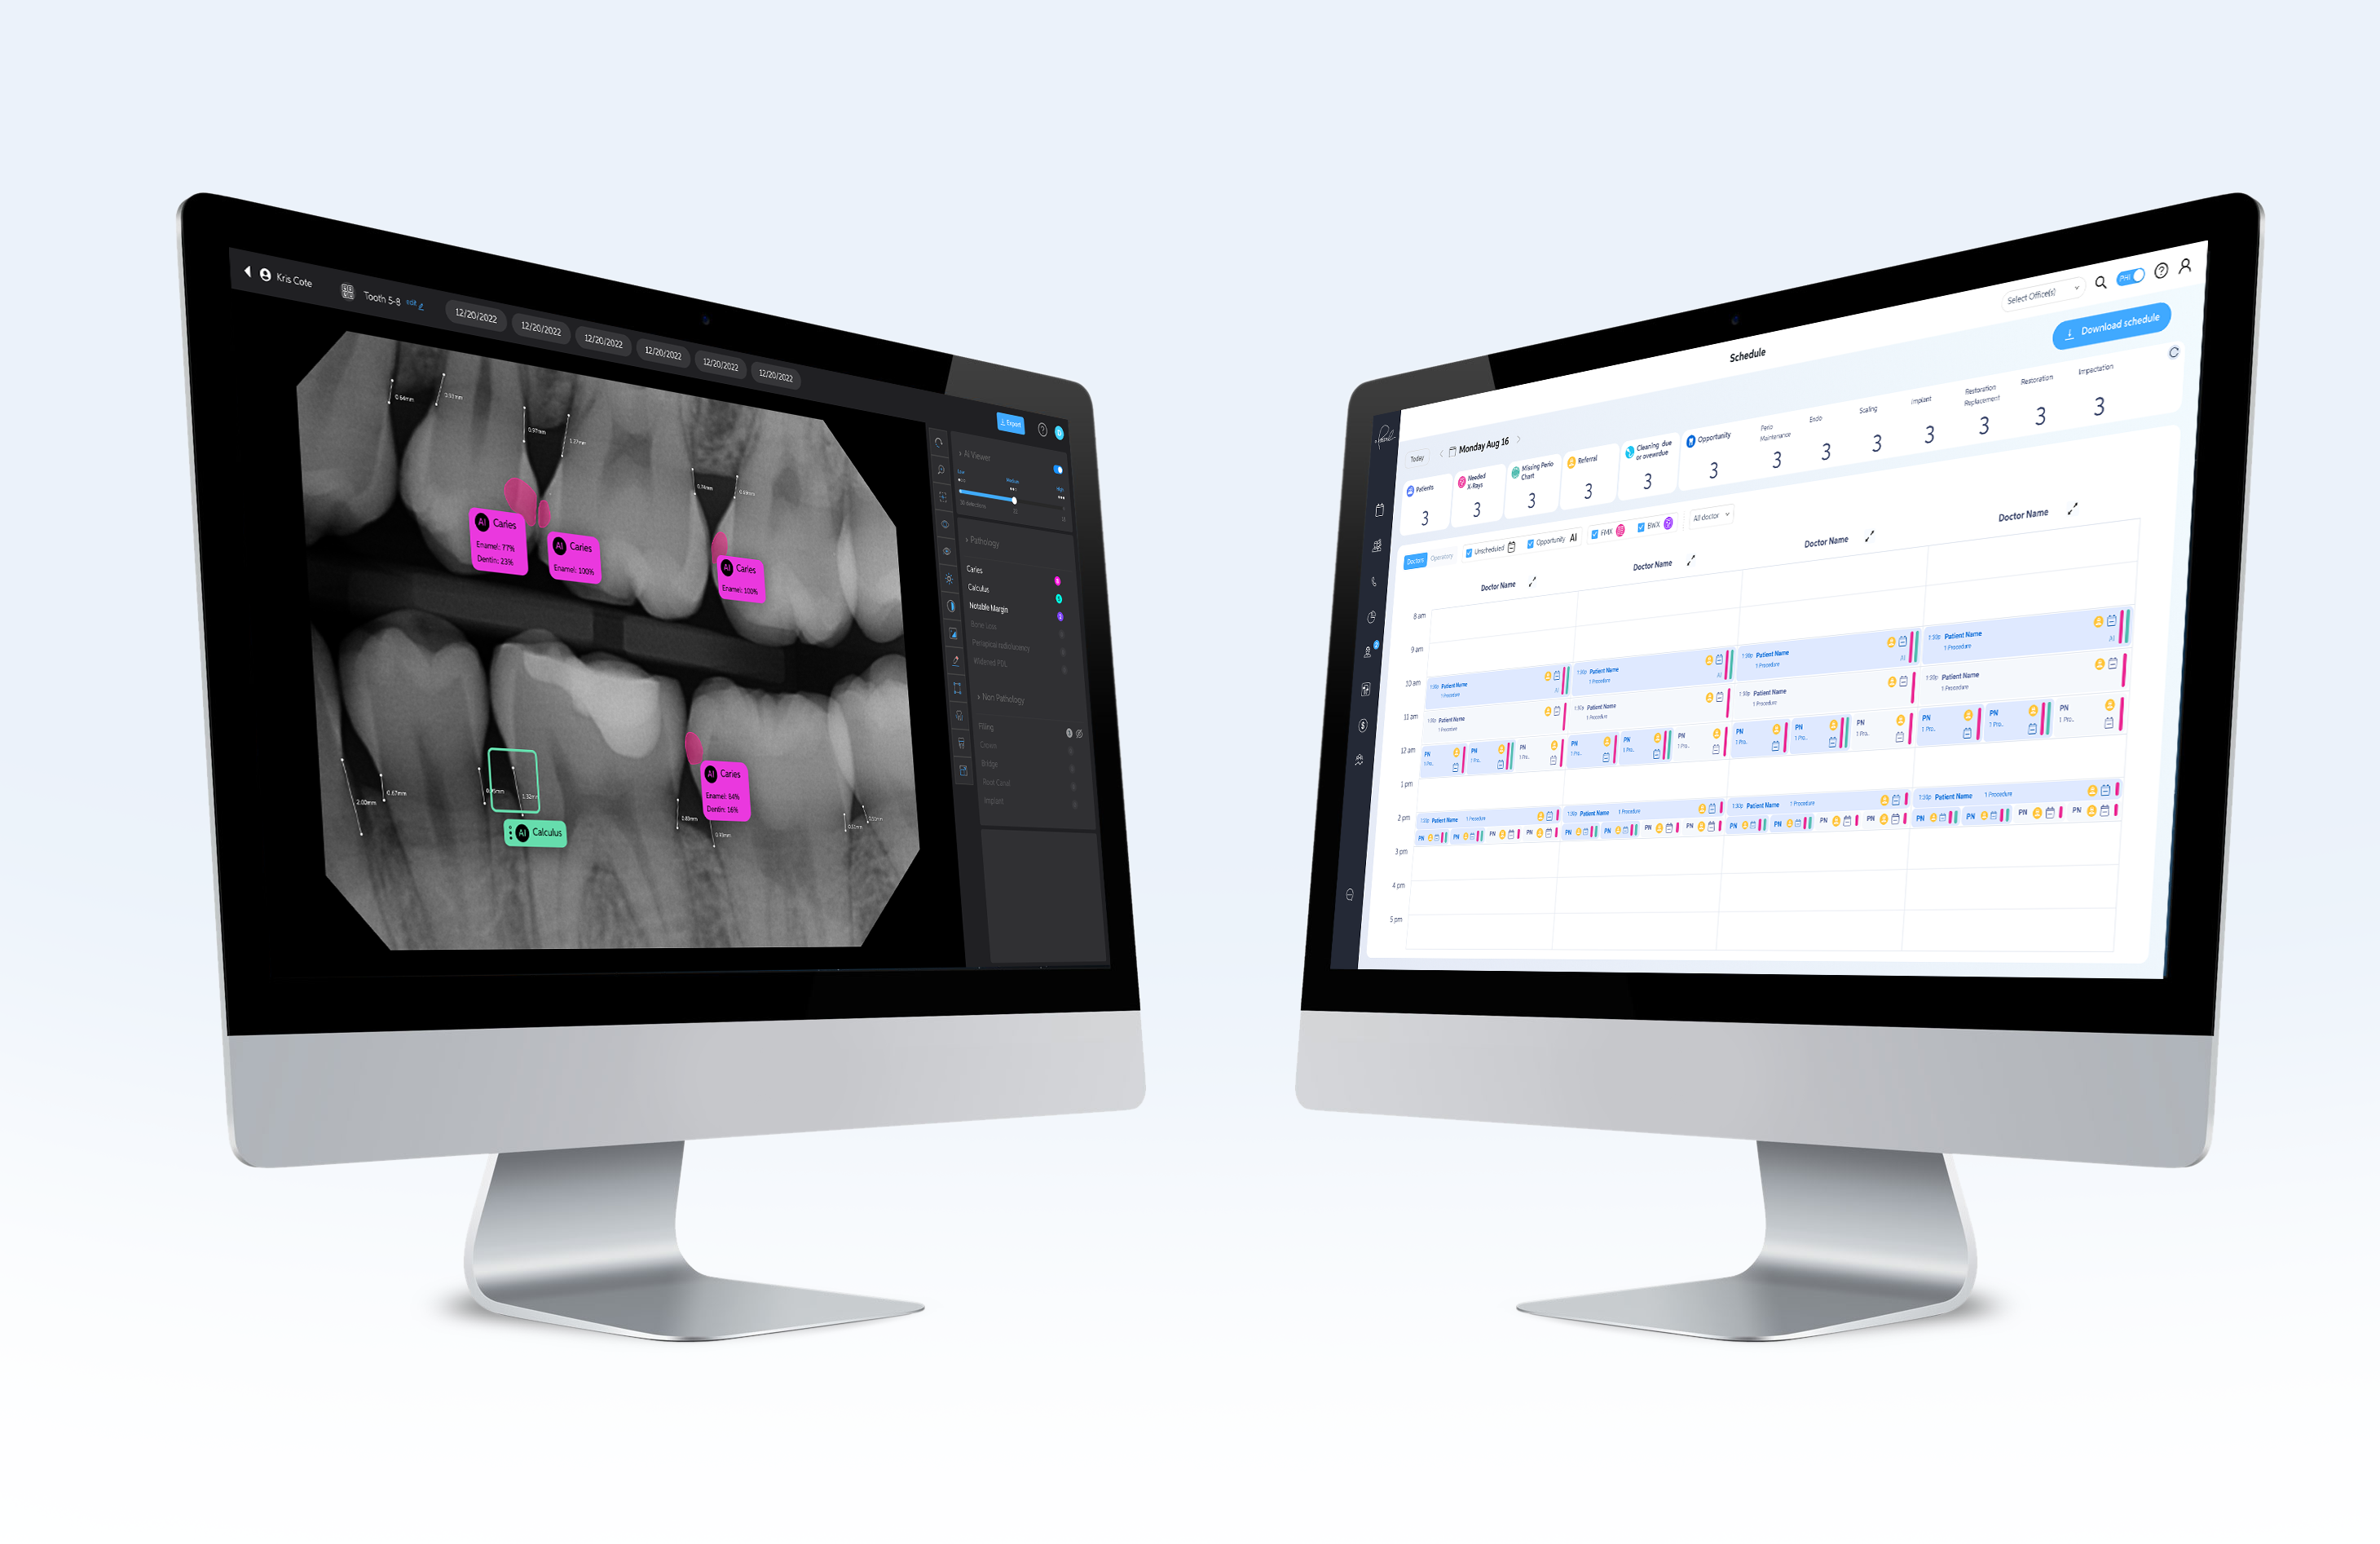 Pearl’s solutions introduce the most state-of-the-art radiologic dental AI technologies to chairside patient care and day-to-day office operations.